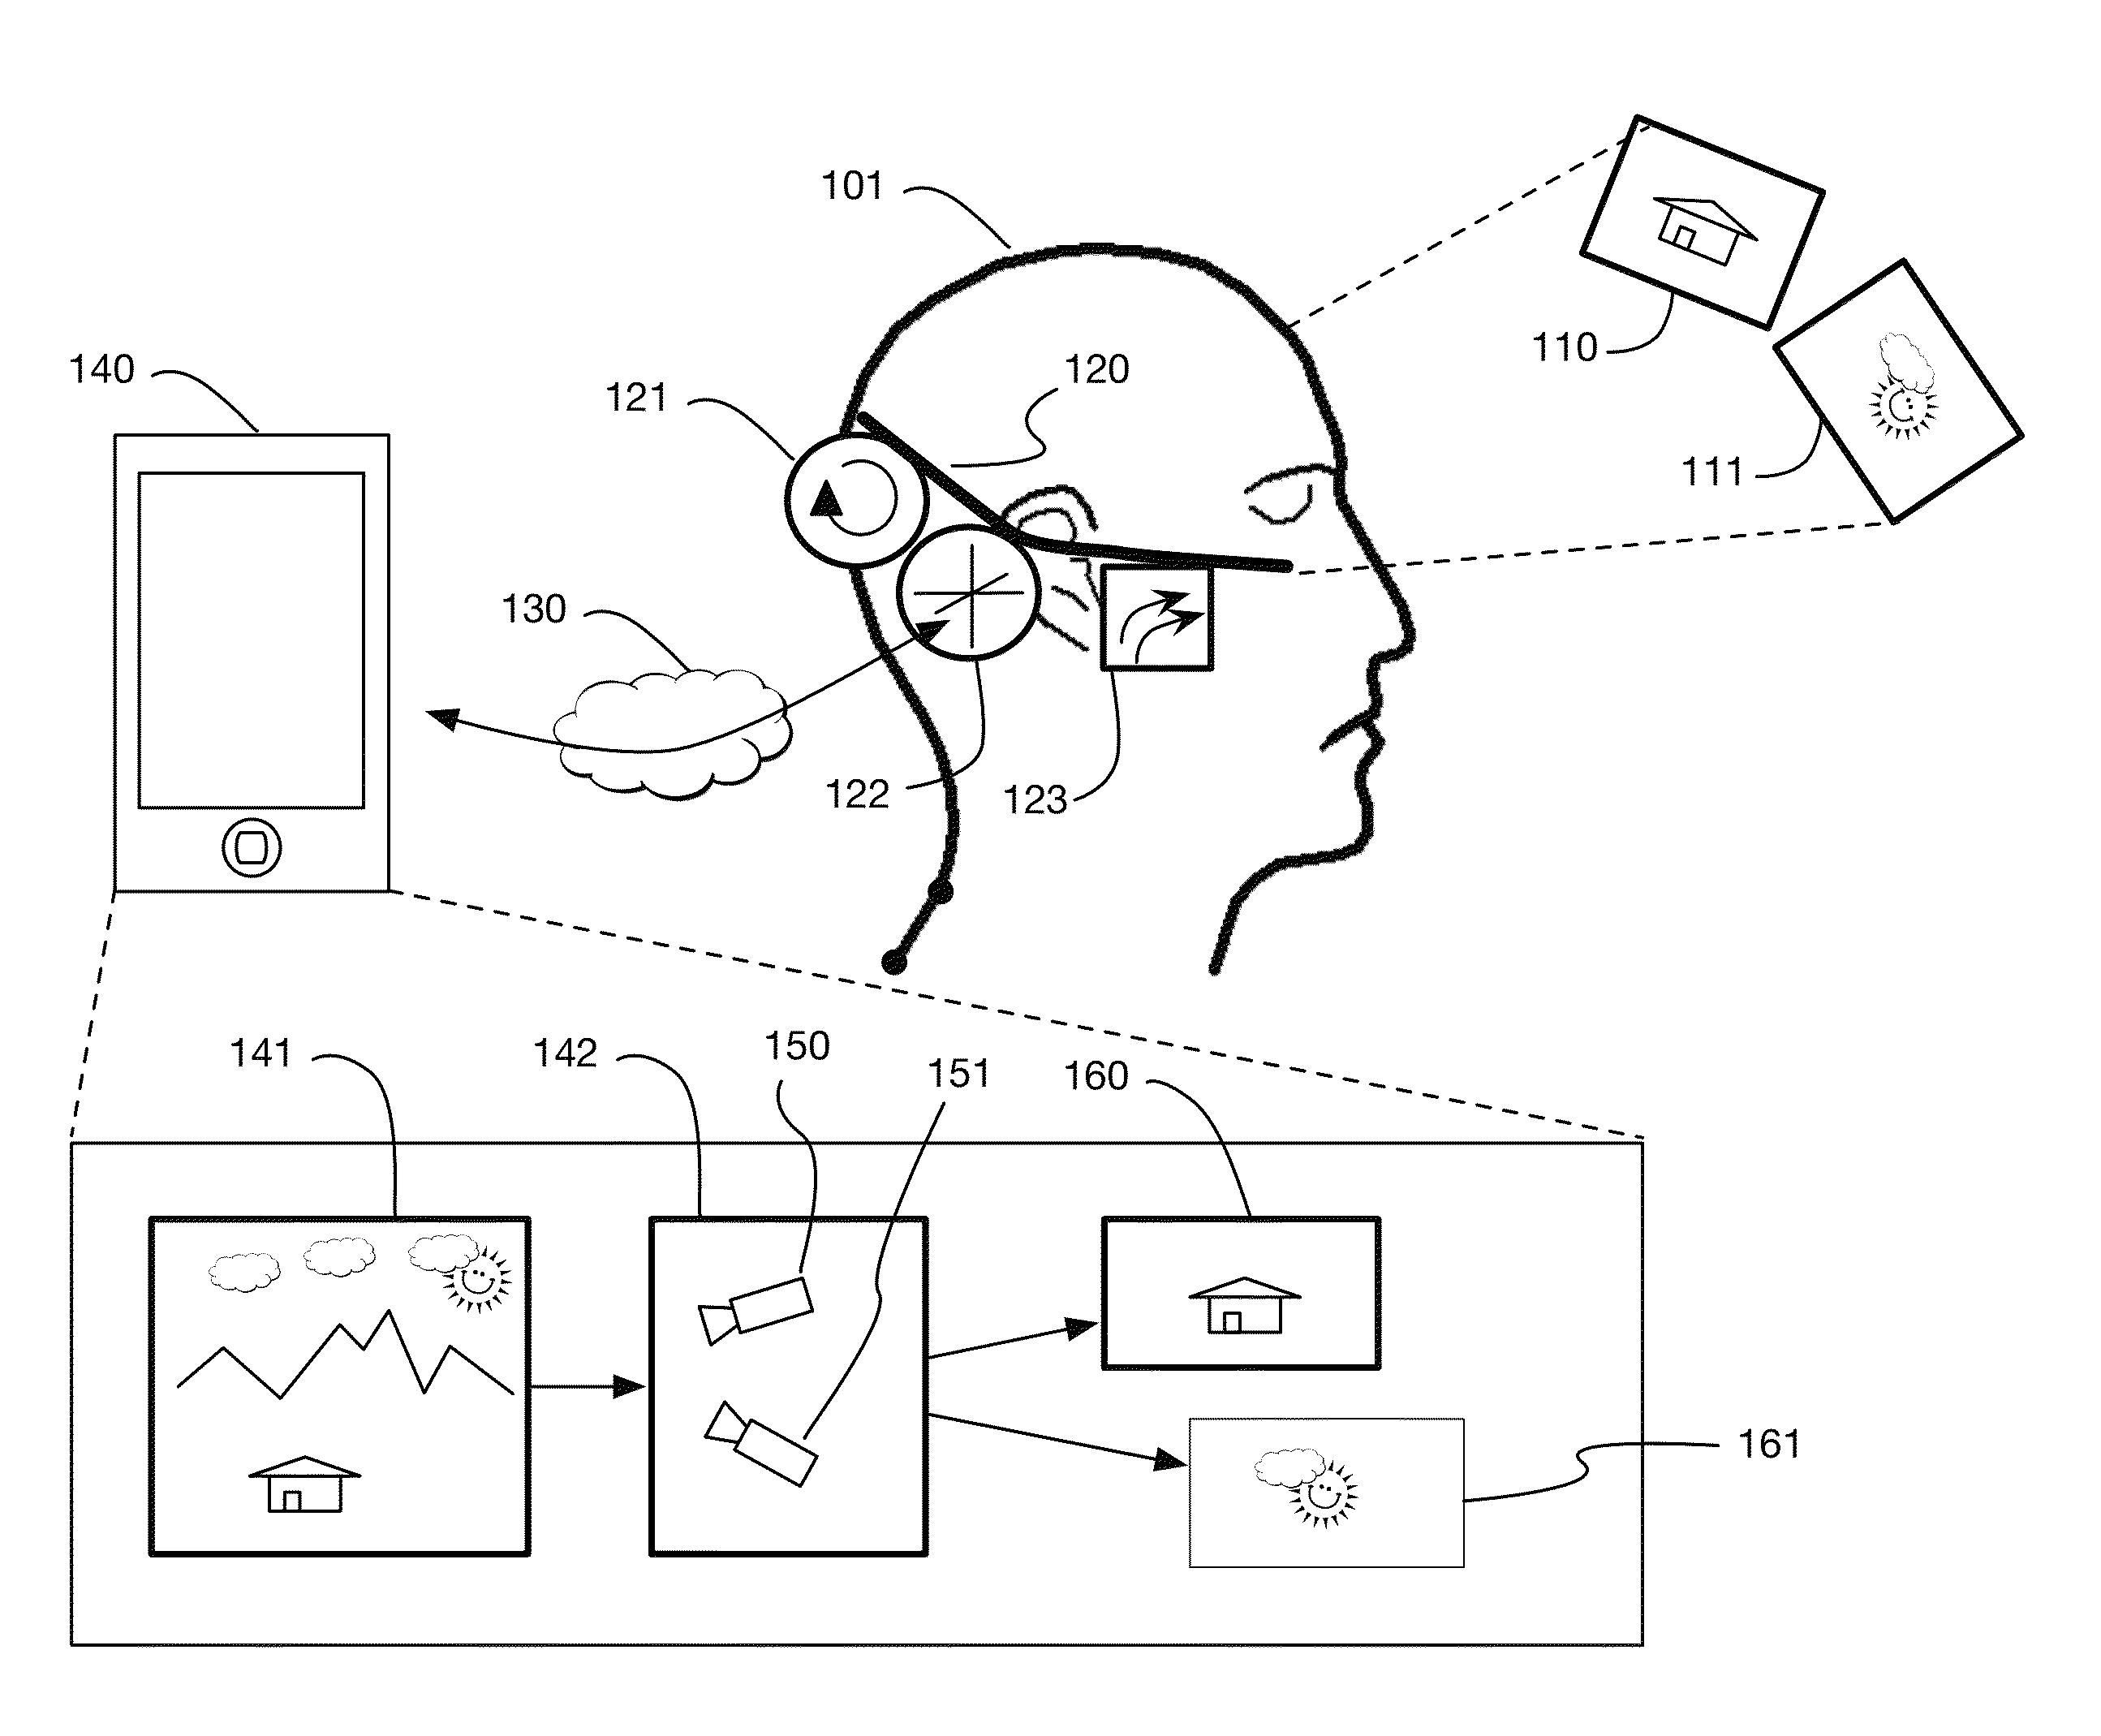 Low-latency virtual reality display system